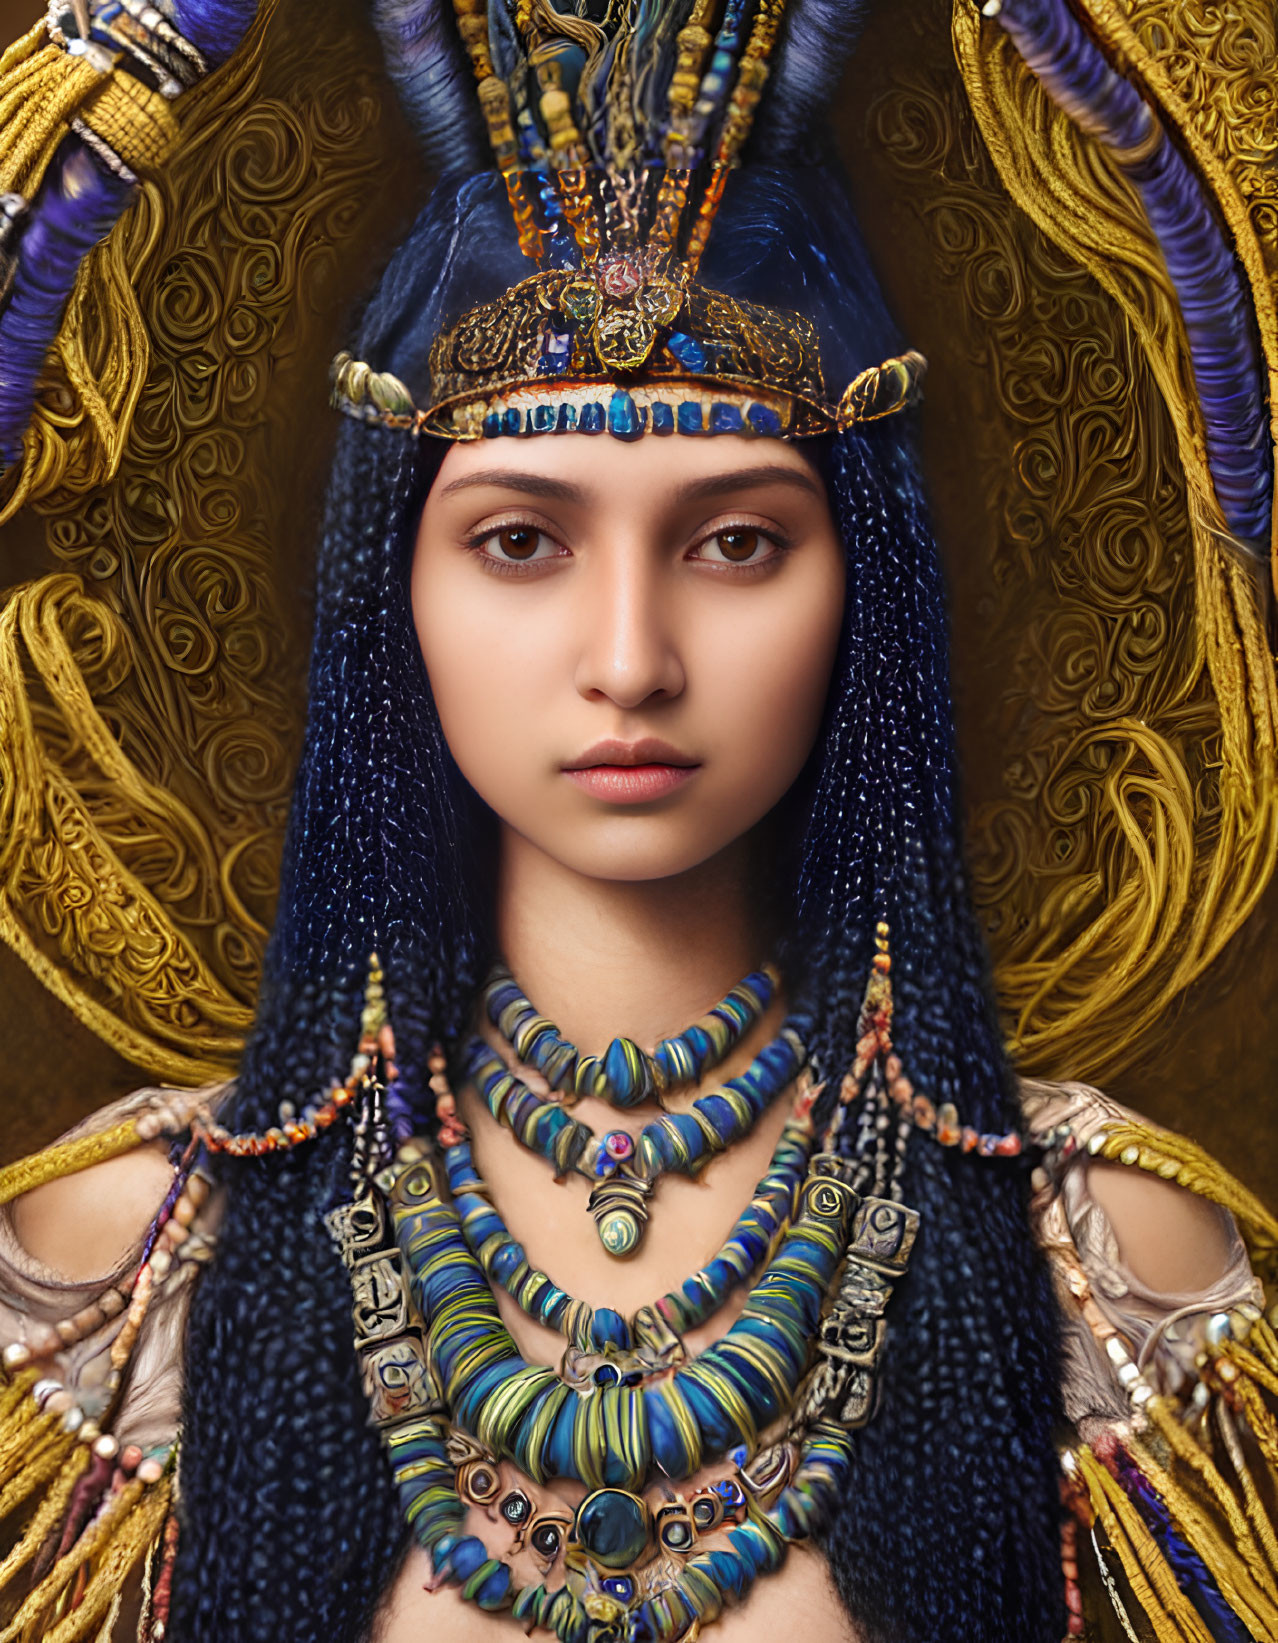 Detailed Egyptian Pharaoh Portrait with Ornate Headdress and Jewelry